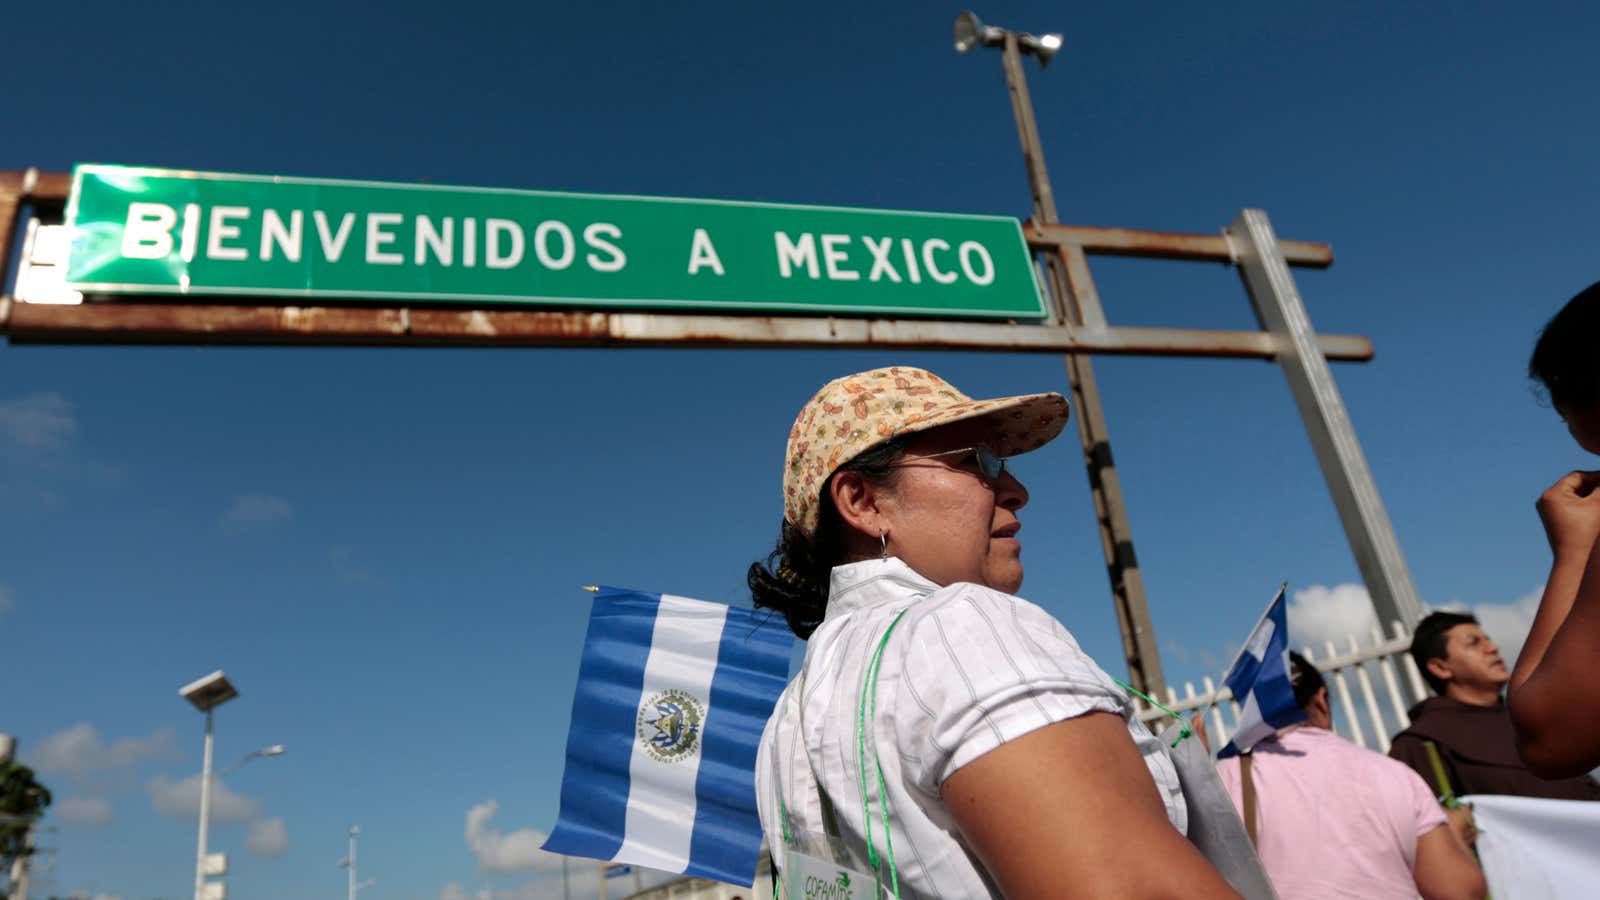 For thousands of migrants, “Welcome to Mexico” is a death sentence.